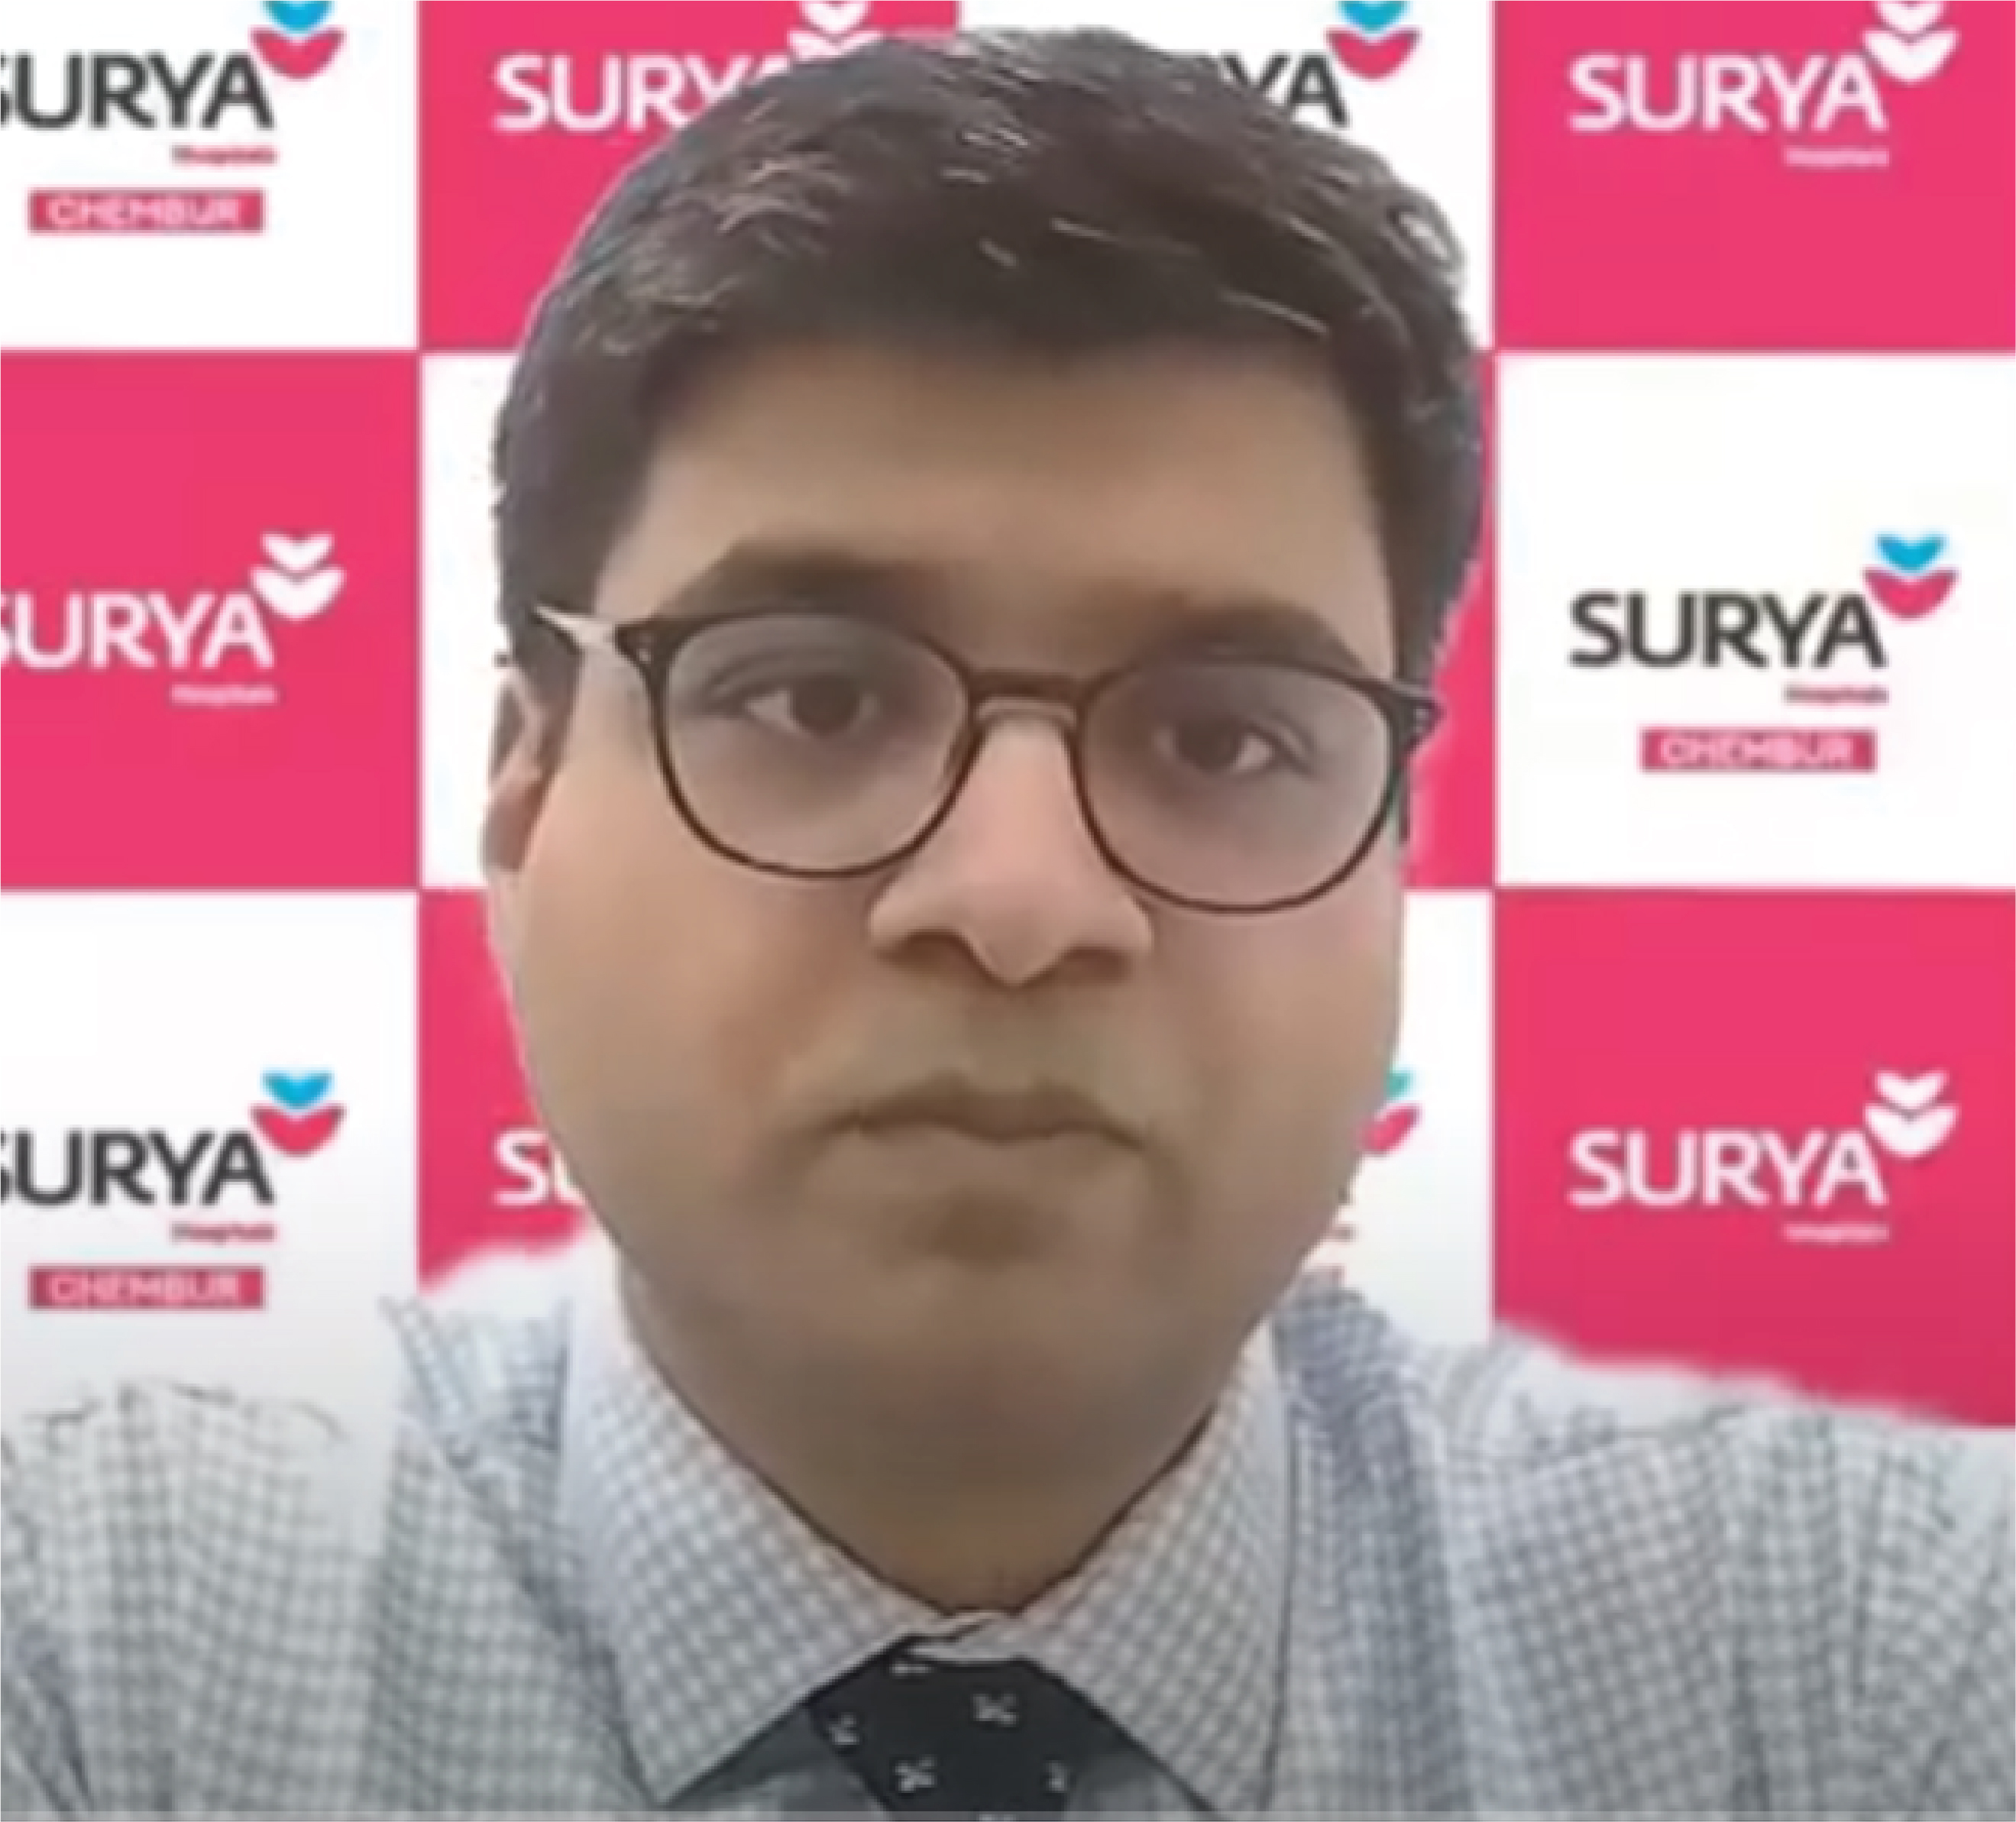 Surya Hospitals | Early or Precocious Puberty in children | Dr. Nikhil Shah | FB Live